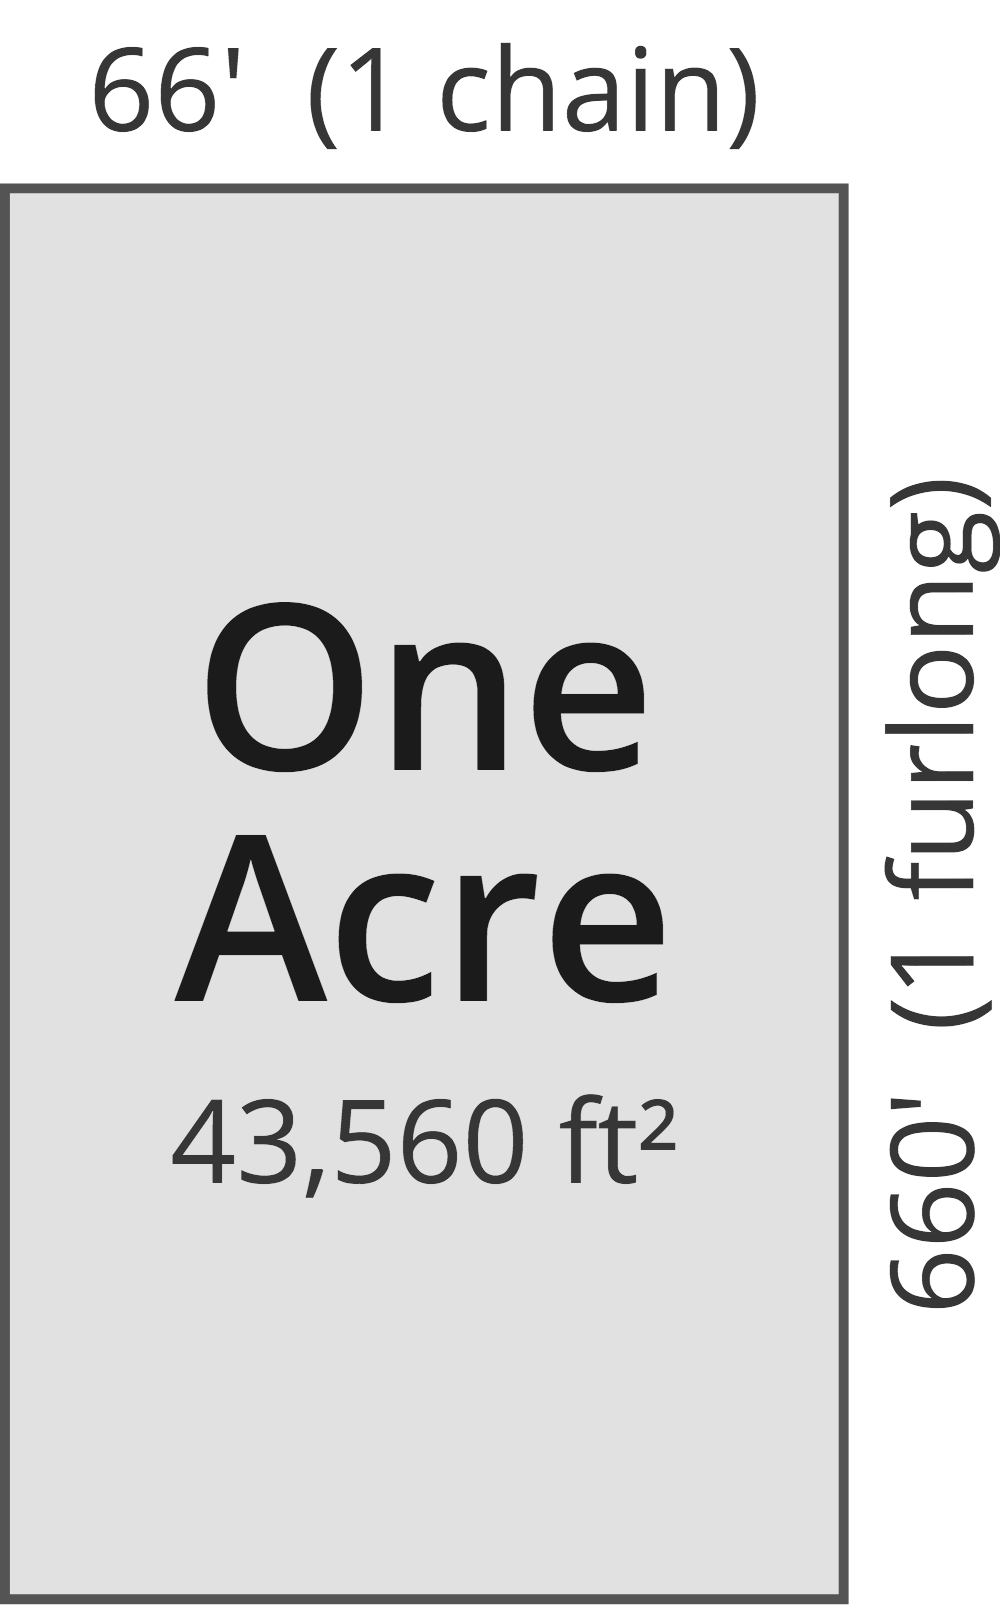 illustration showing the size of an acre is a parcel of land that is 66 feet by 660 feet.